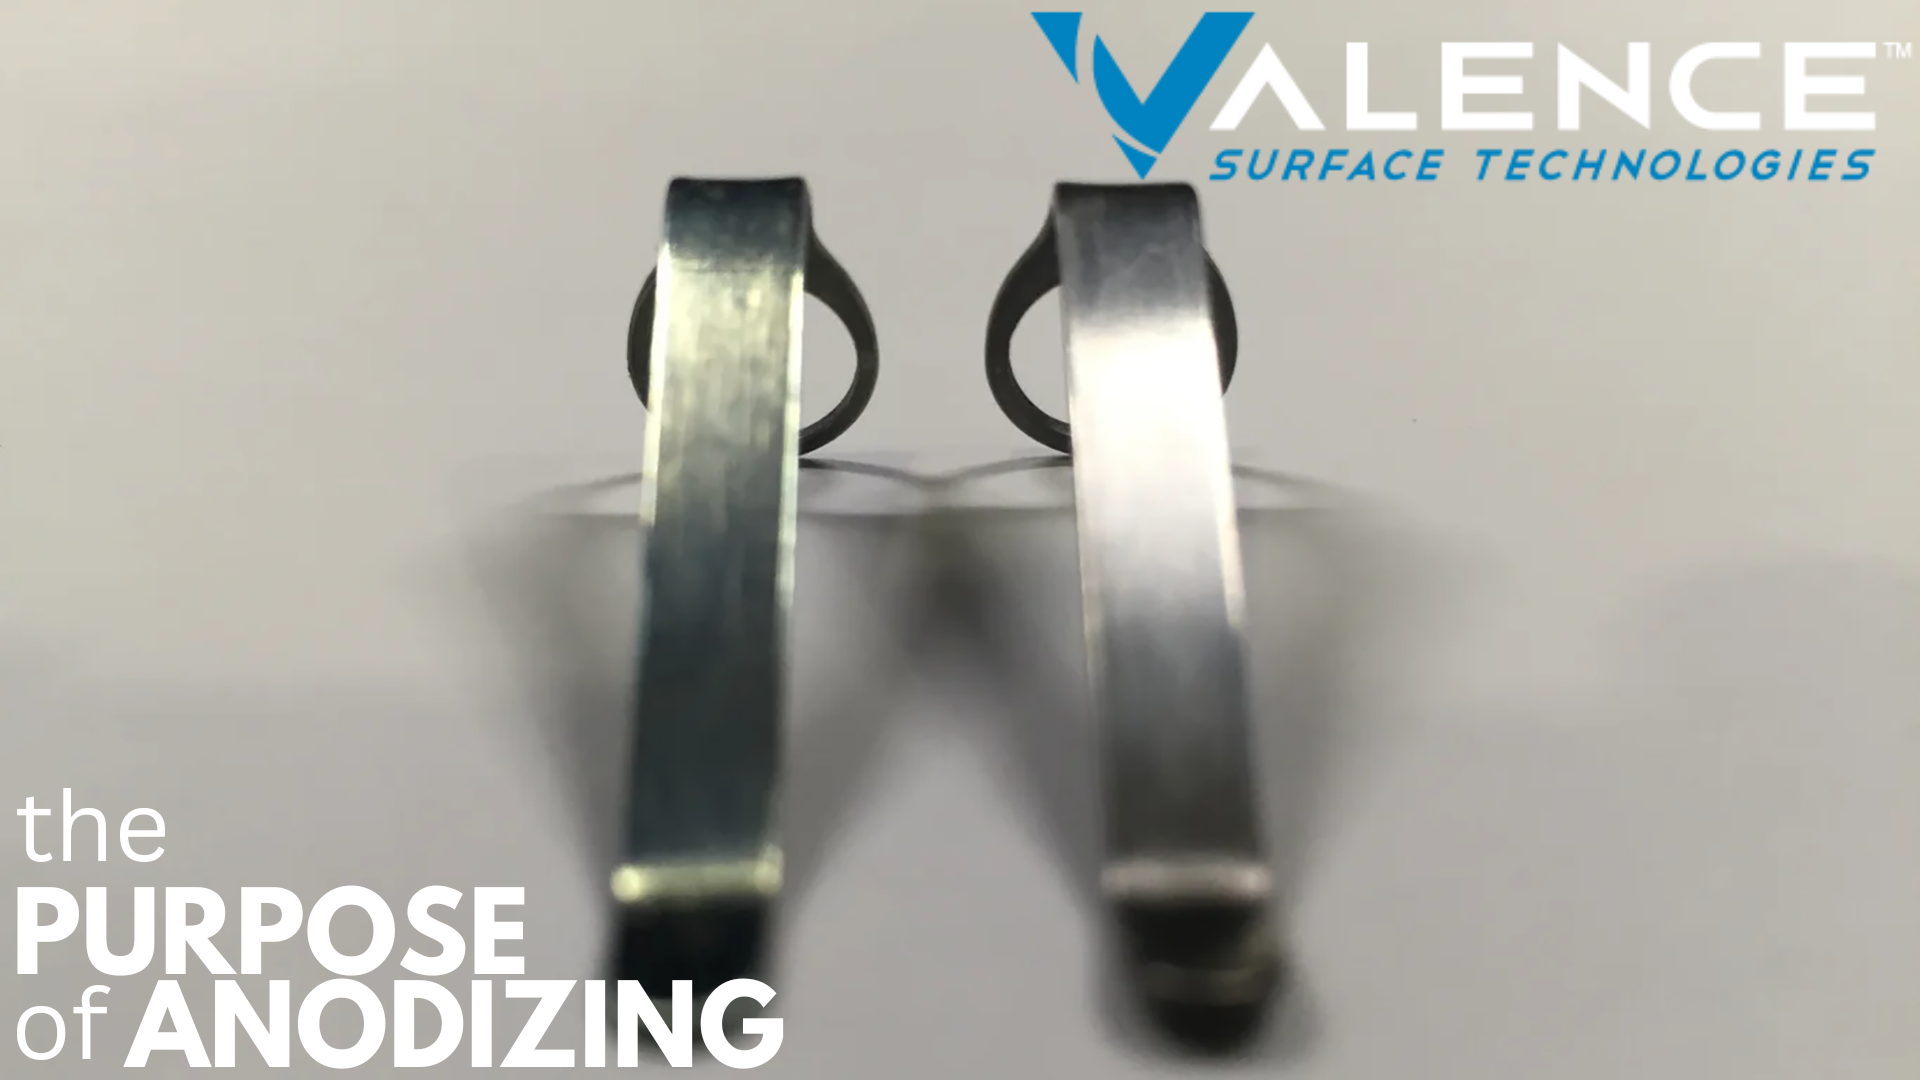 What Is The Purpose Of Anodizing?